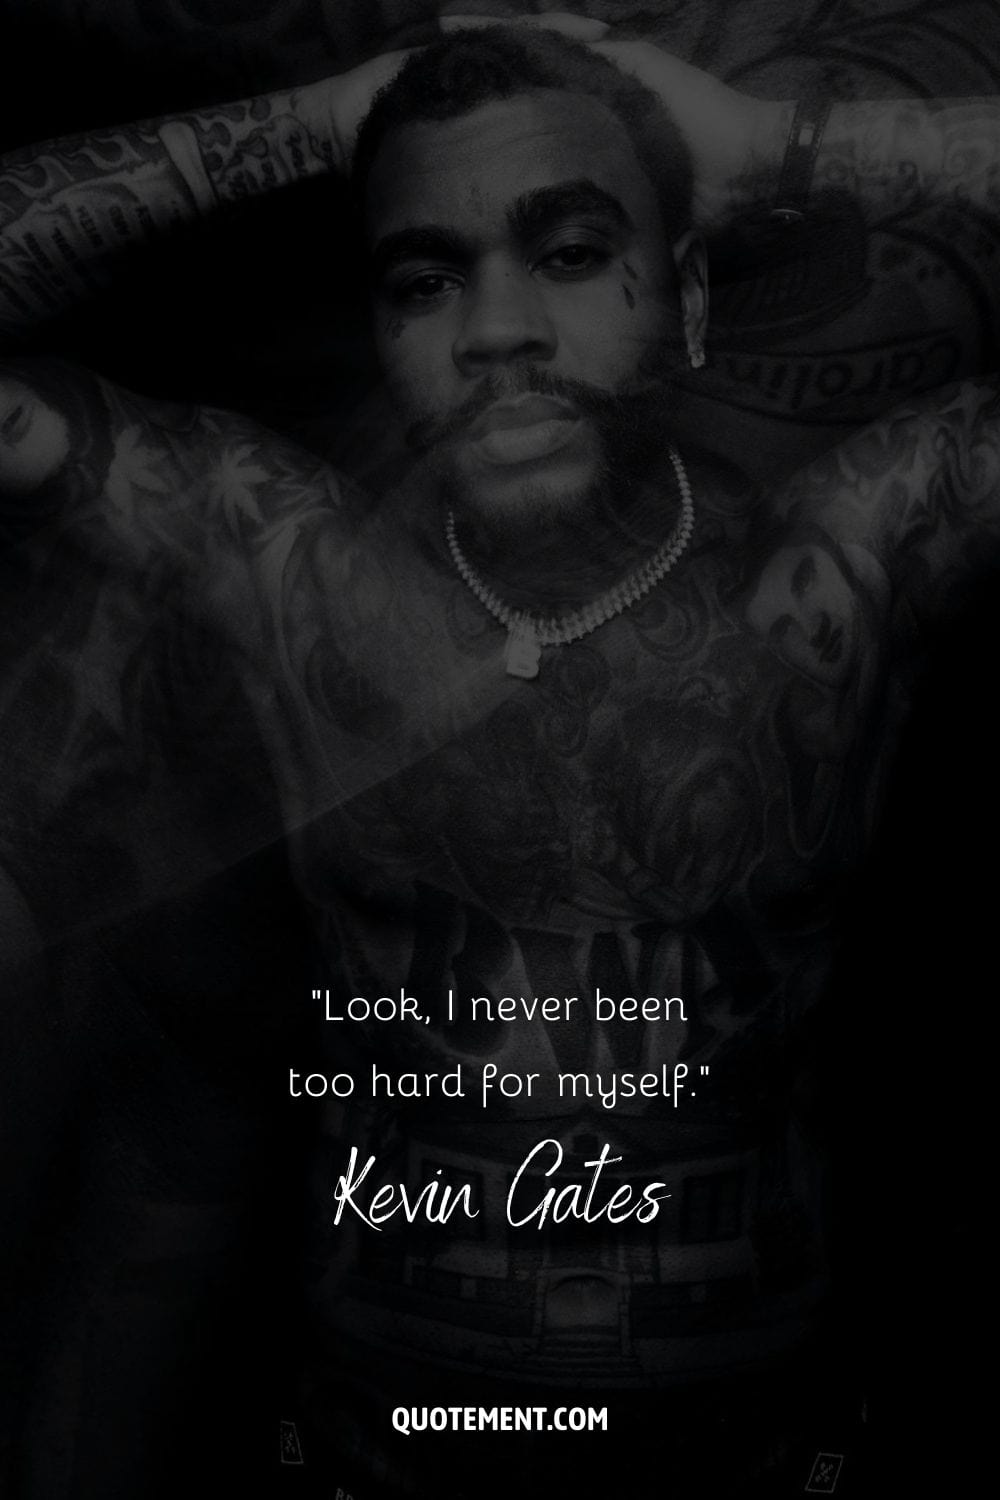 “Look, I never been too hard for myself.” – Kevin Gates